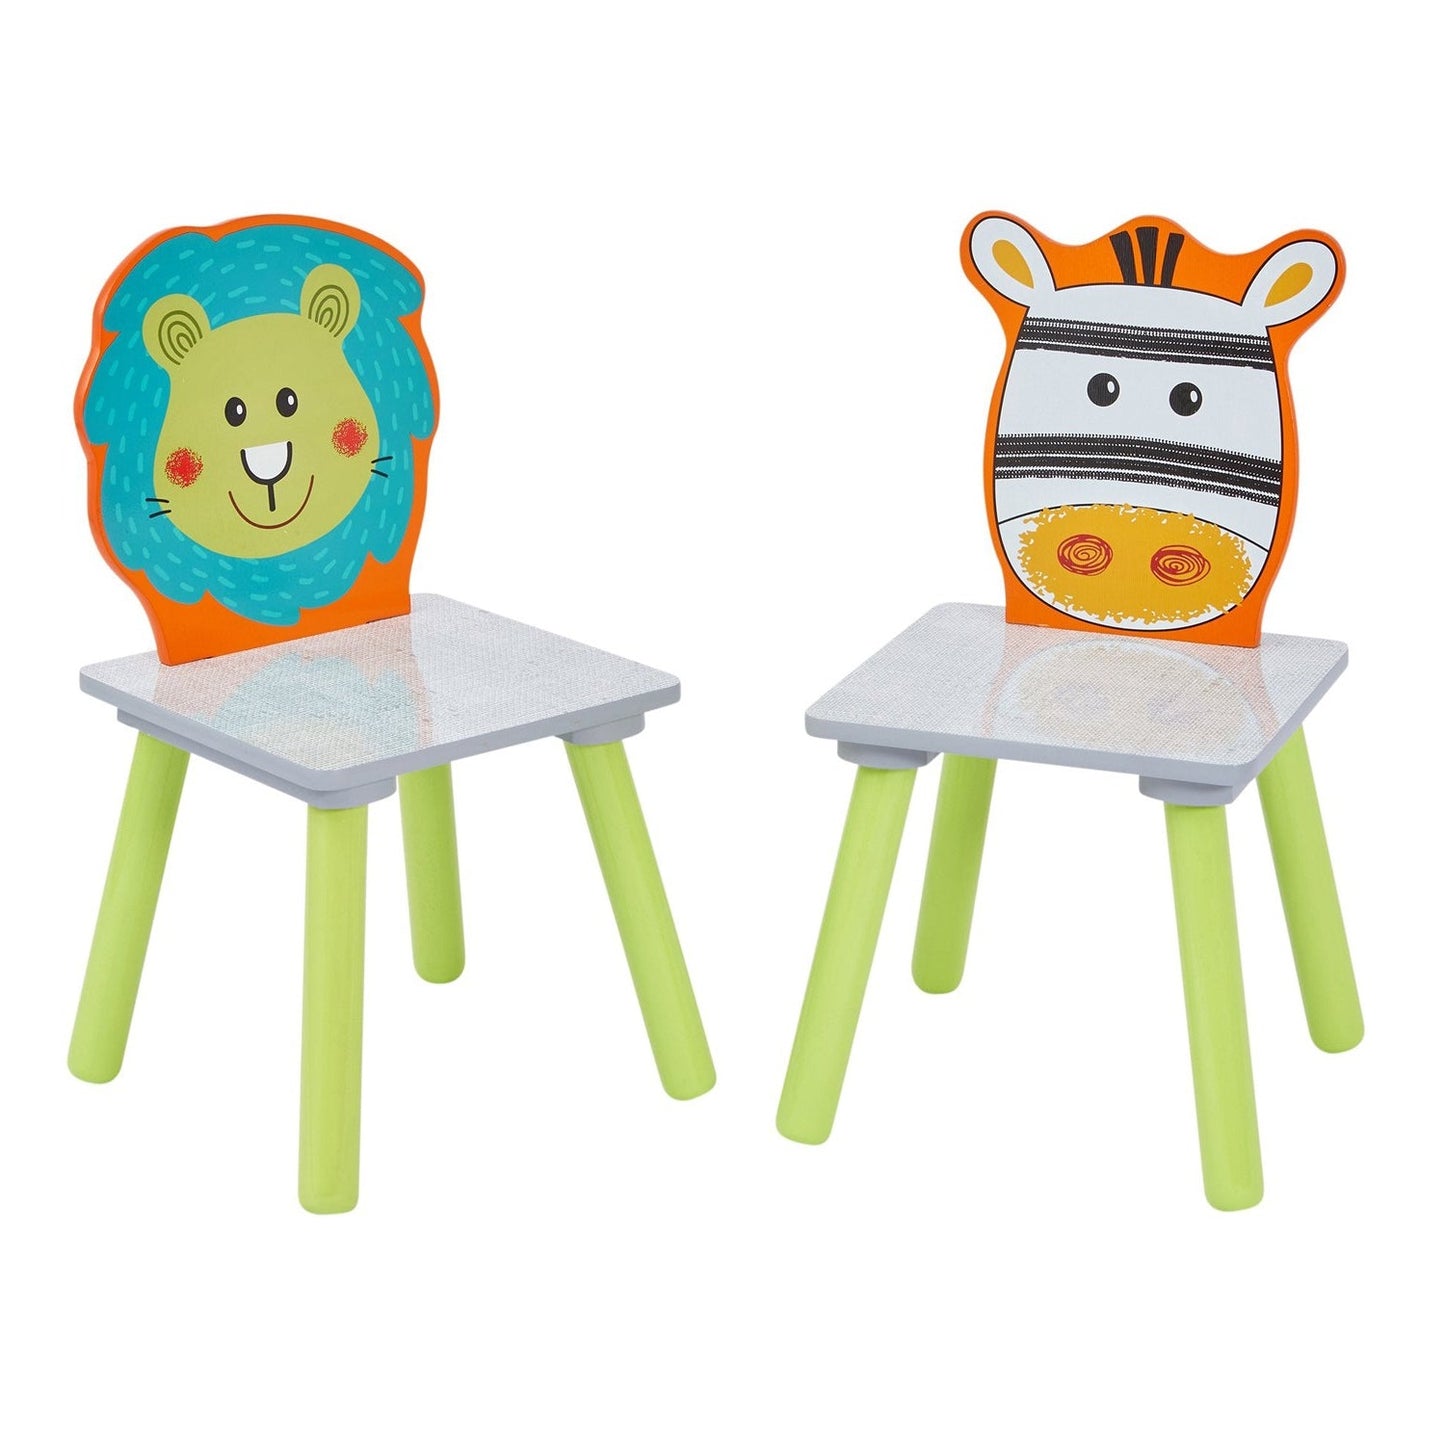 Lion and Zebra Table and Chairs by Liberty House Toys